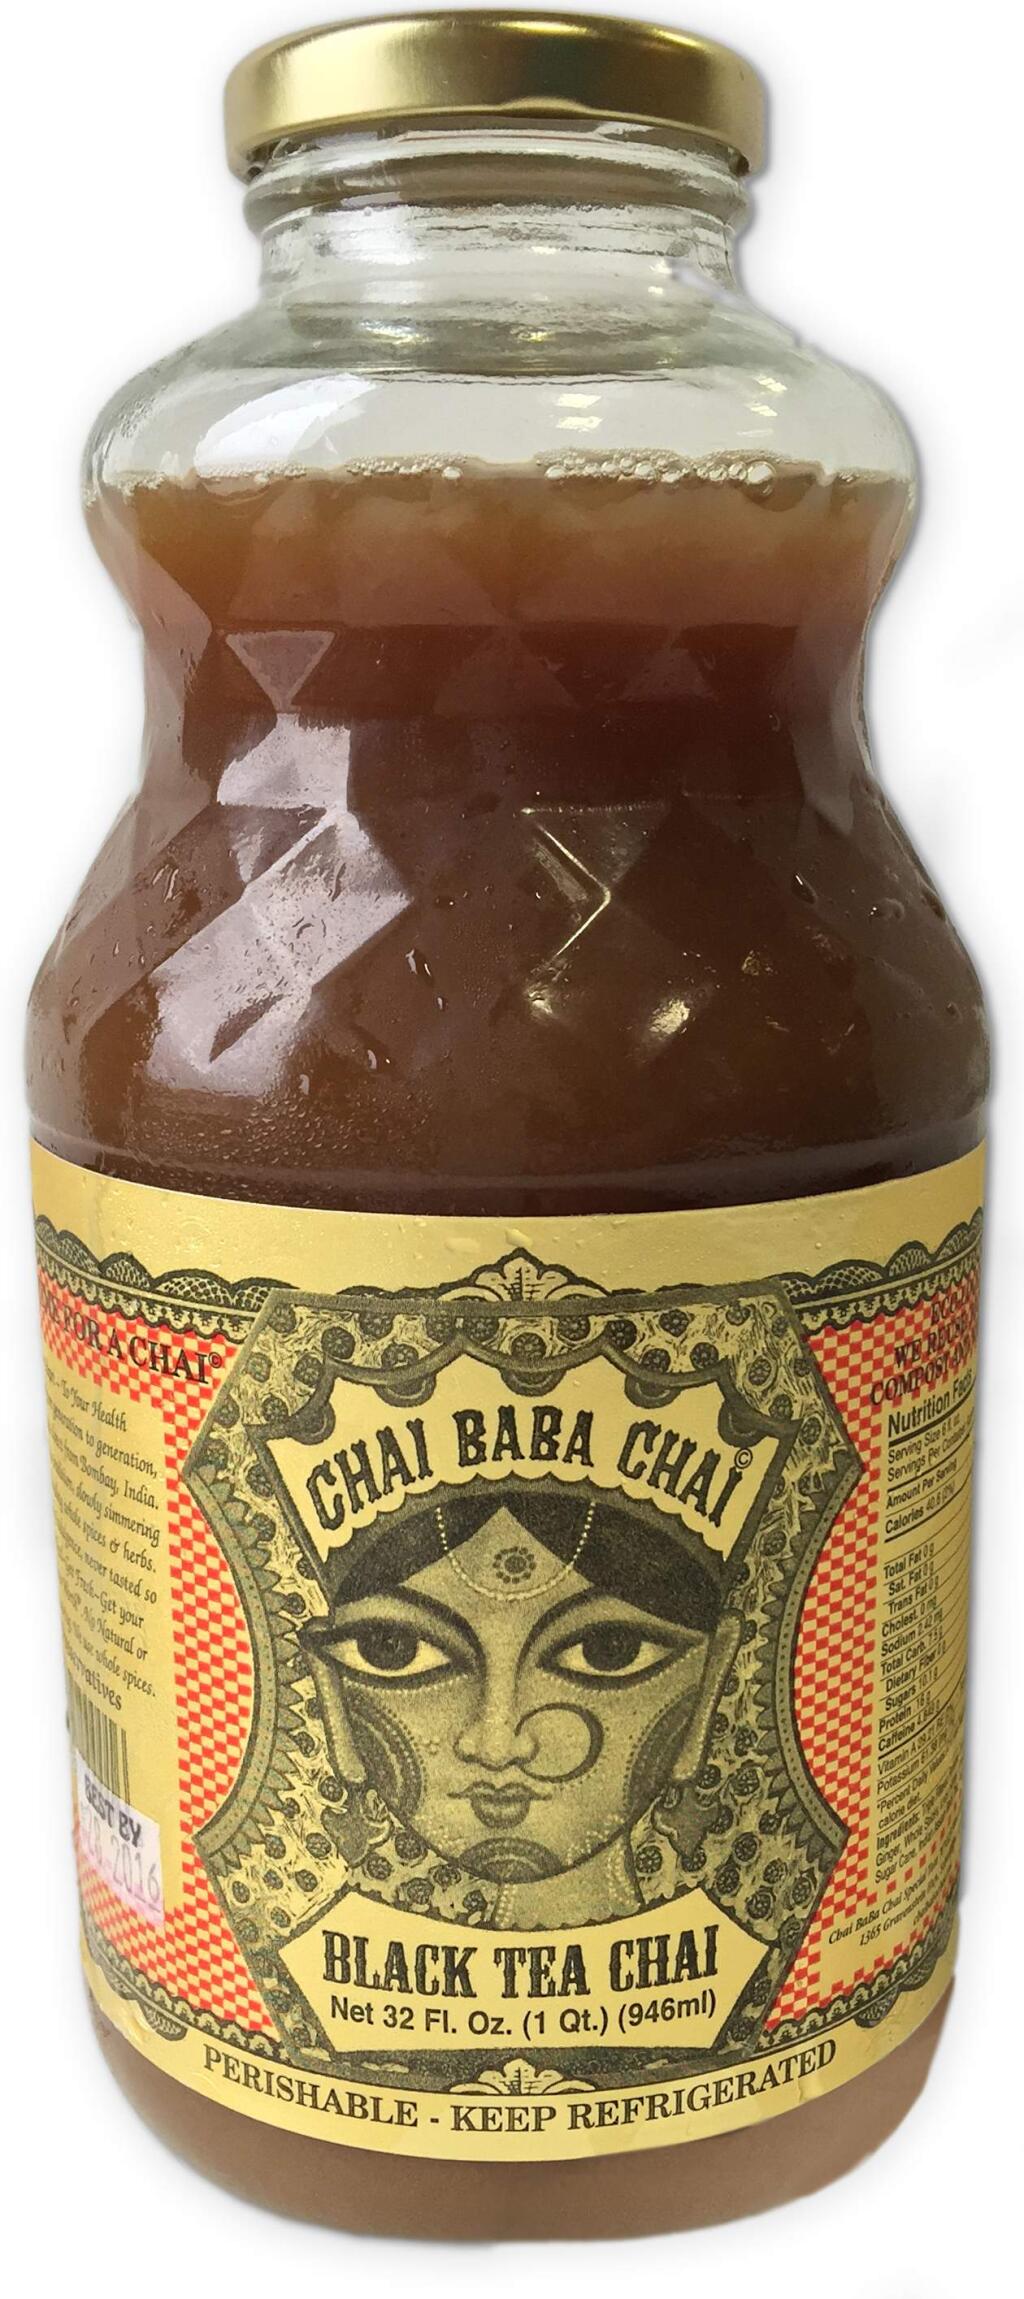 Chai Baba Chai Black Tea Chai is available at Oliver's Market